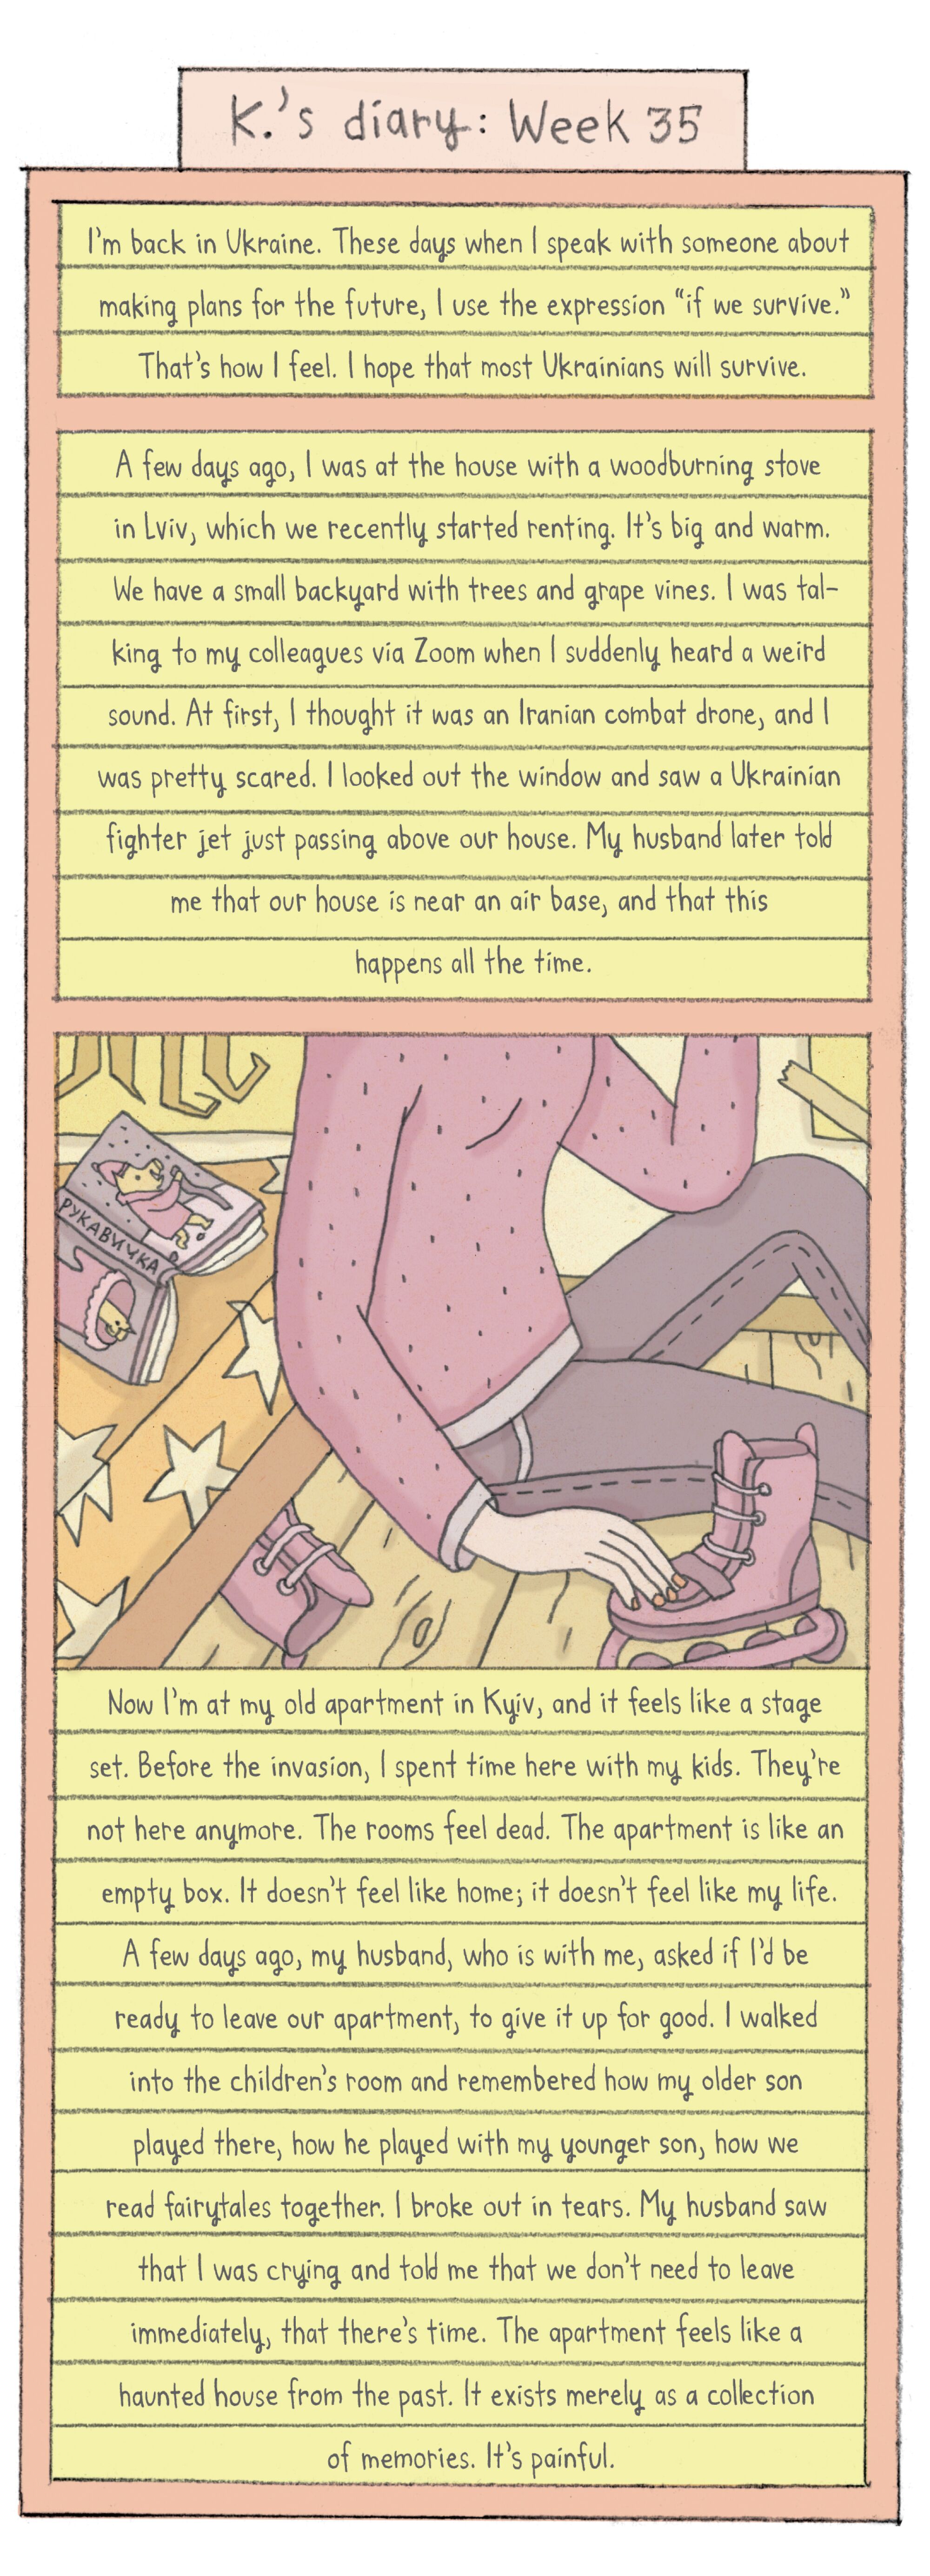 Comic depicting a woman sitting on the floor beside a pair of rollerblades and a book, open and overturned on a table.